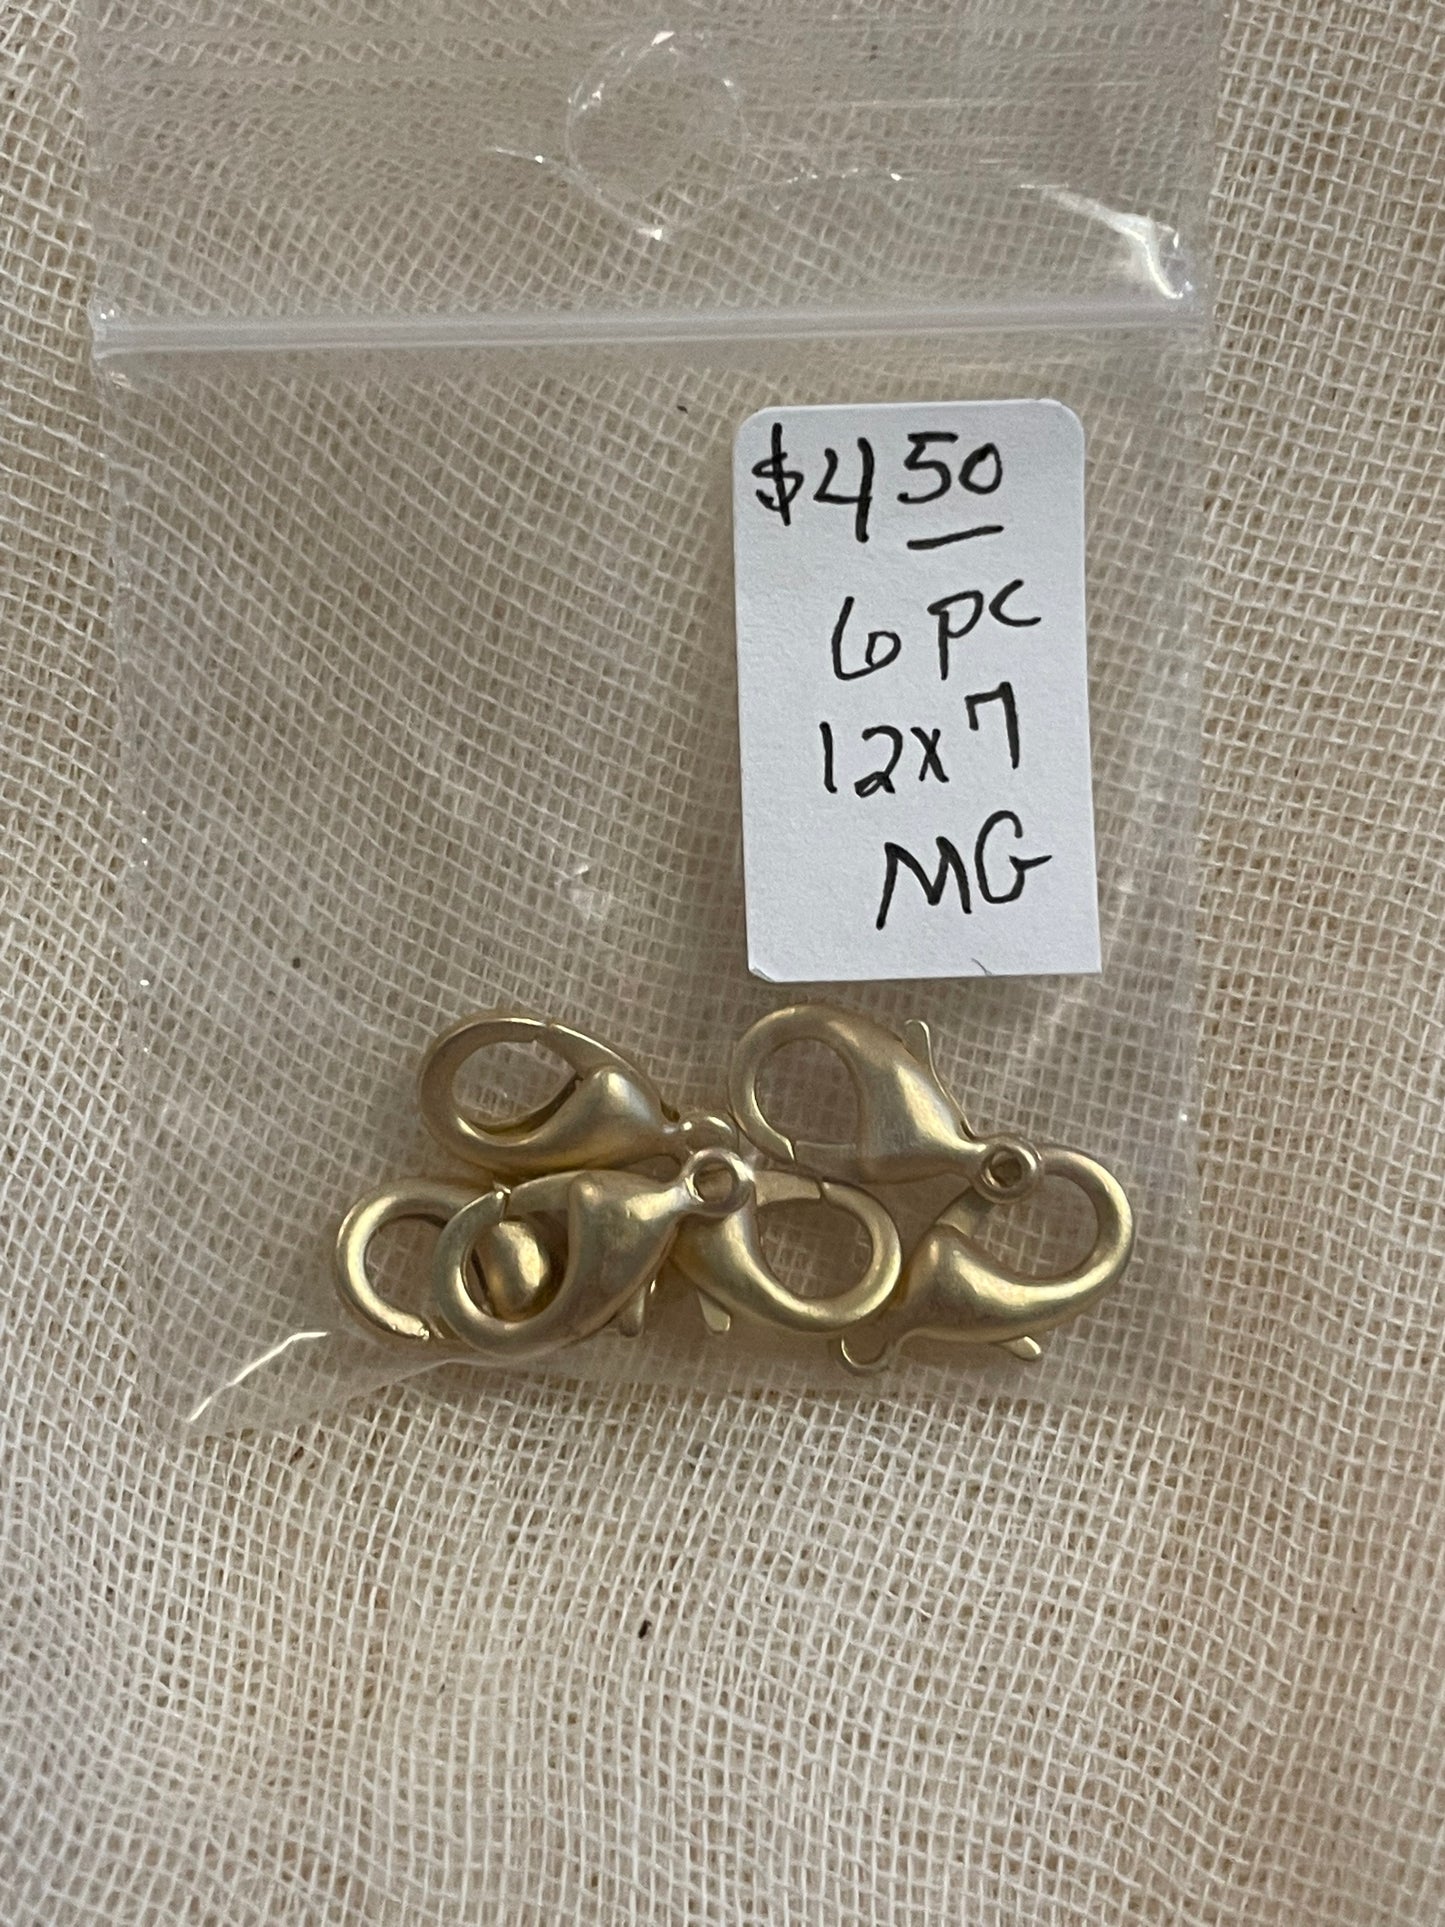 Matte Gold Plated Lobster Claw Clasps 12mm x 7mm 6 Pieces